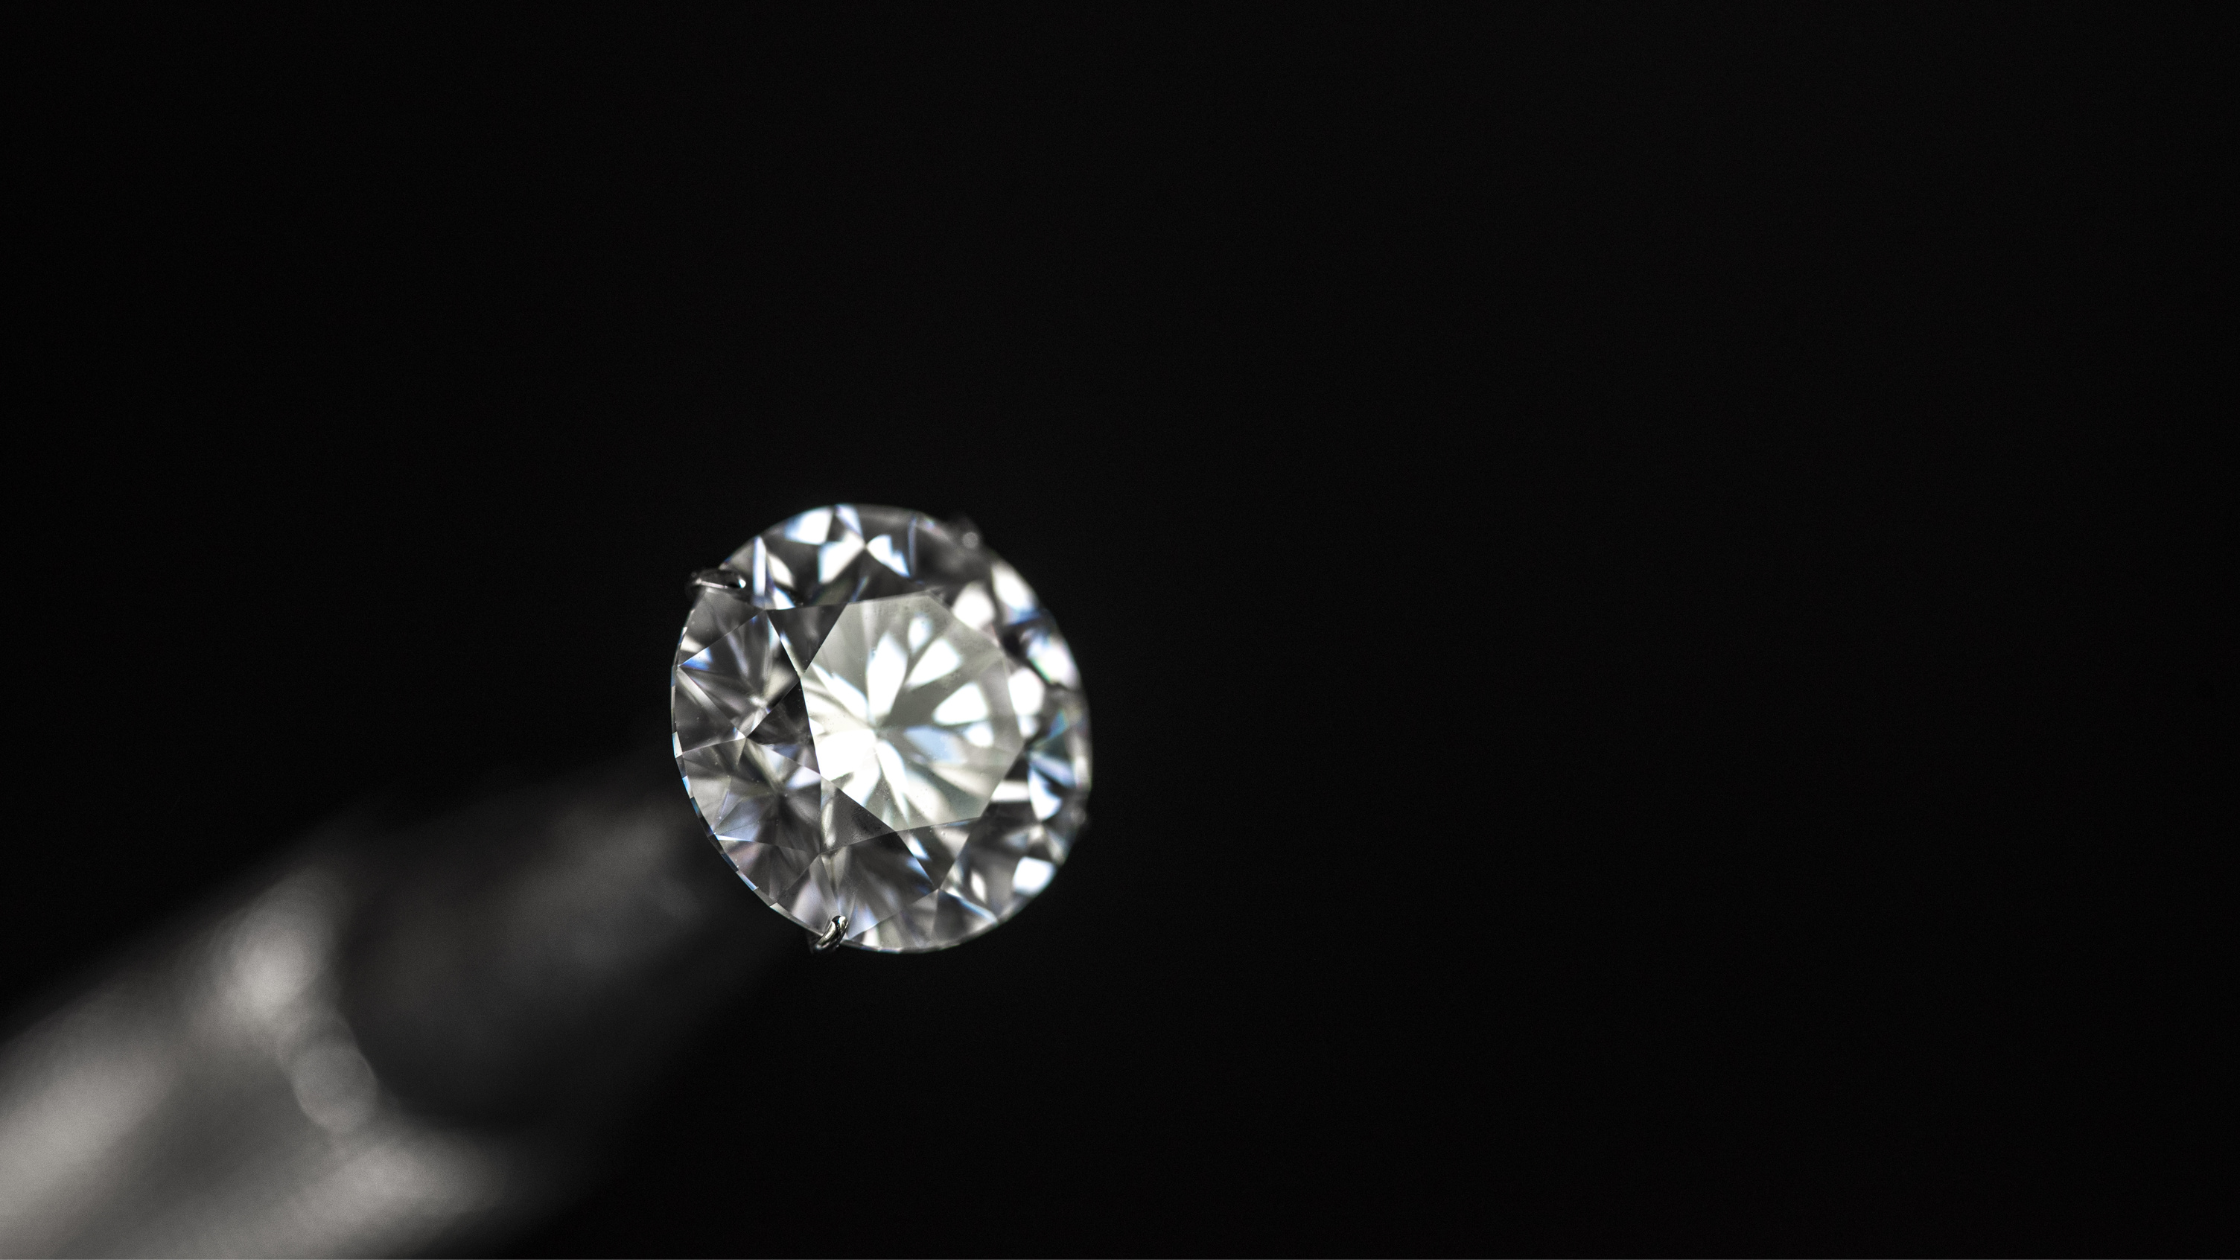 How To Tell The Difference Between Crystal And Diamond – Mervis